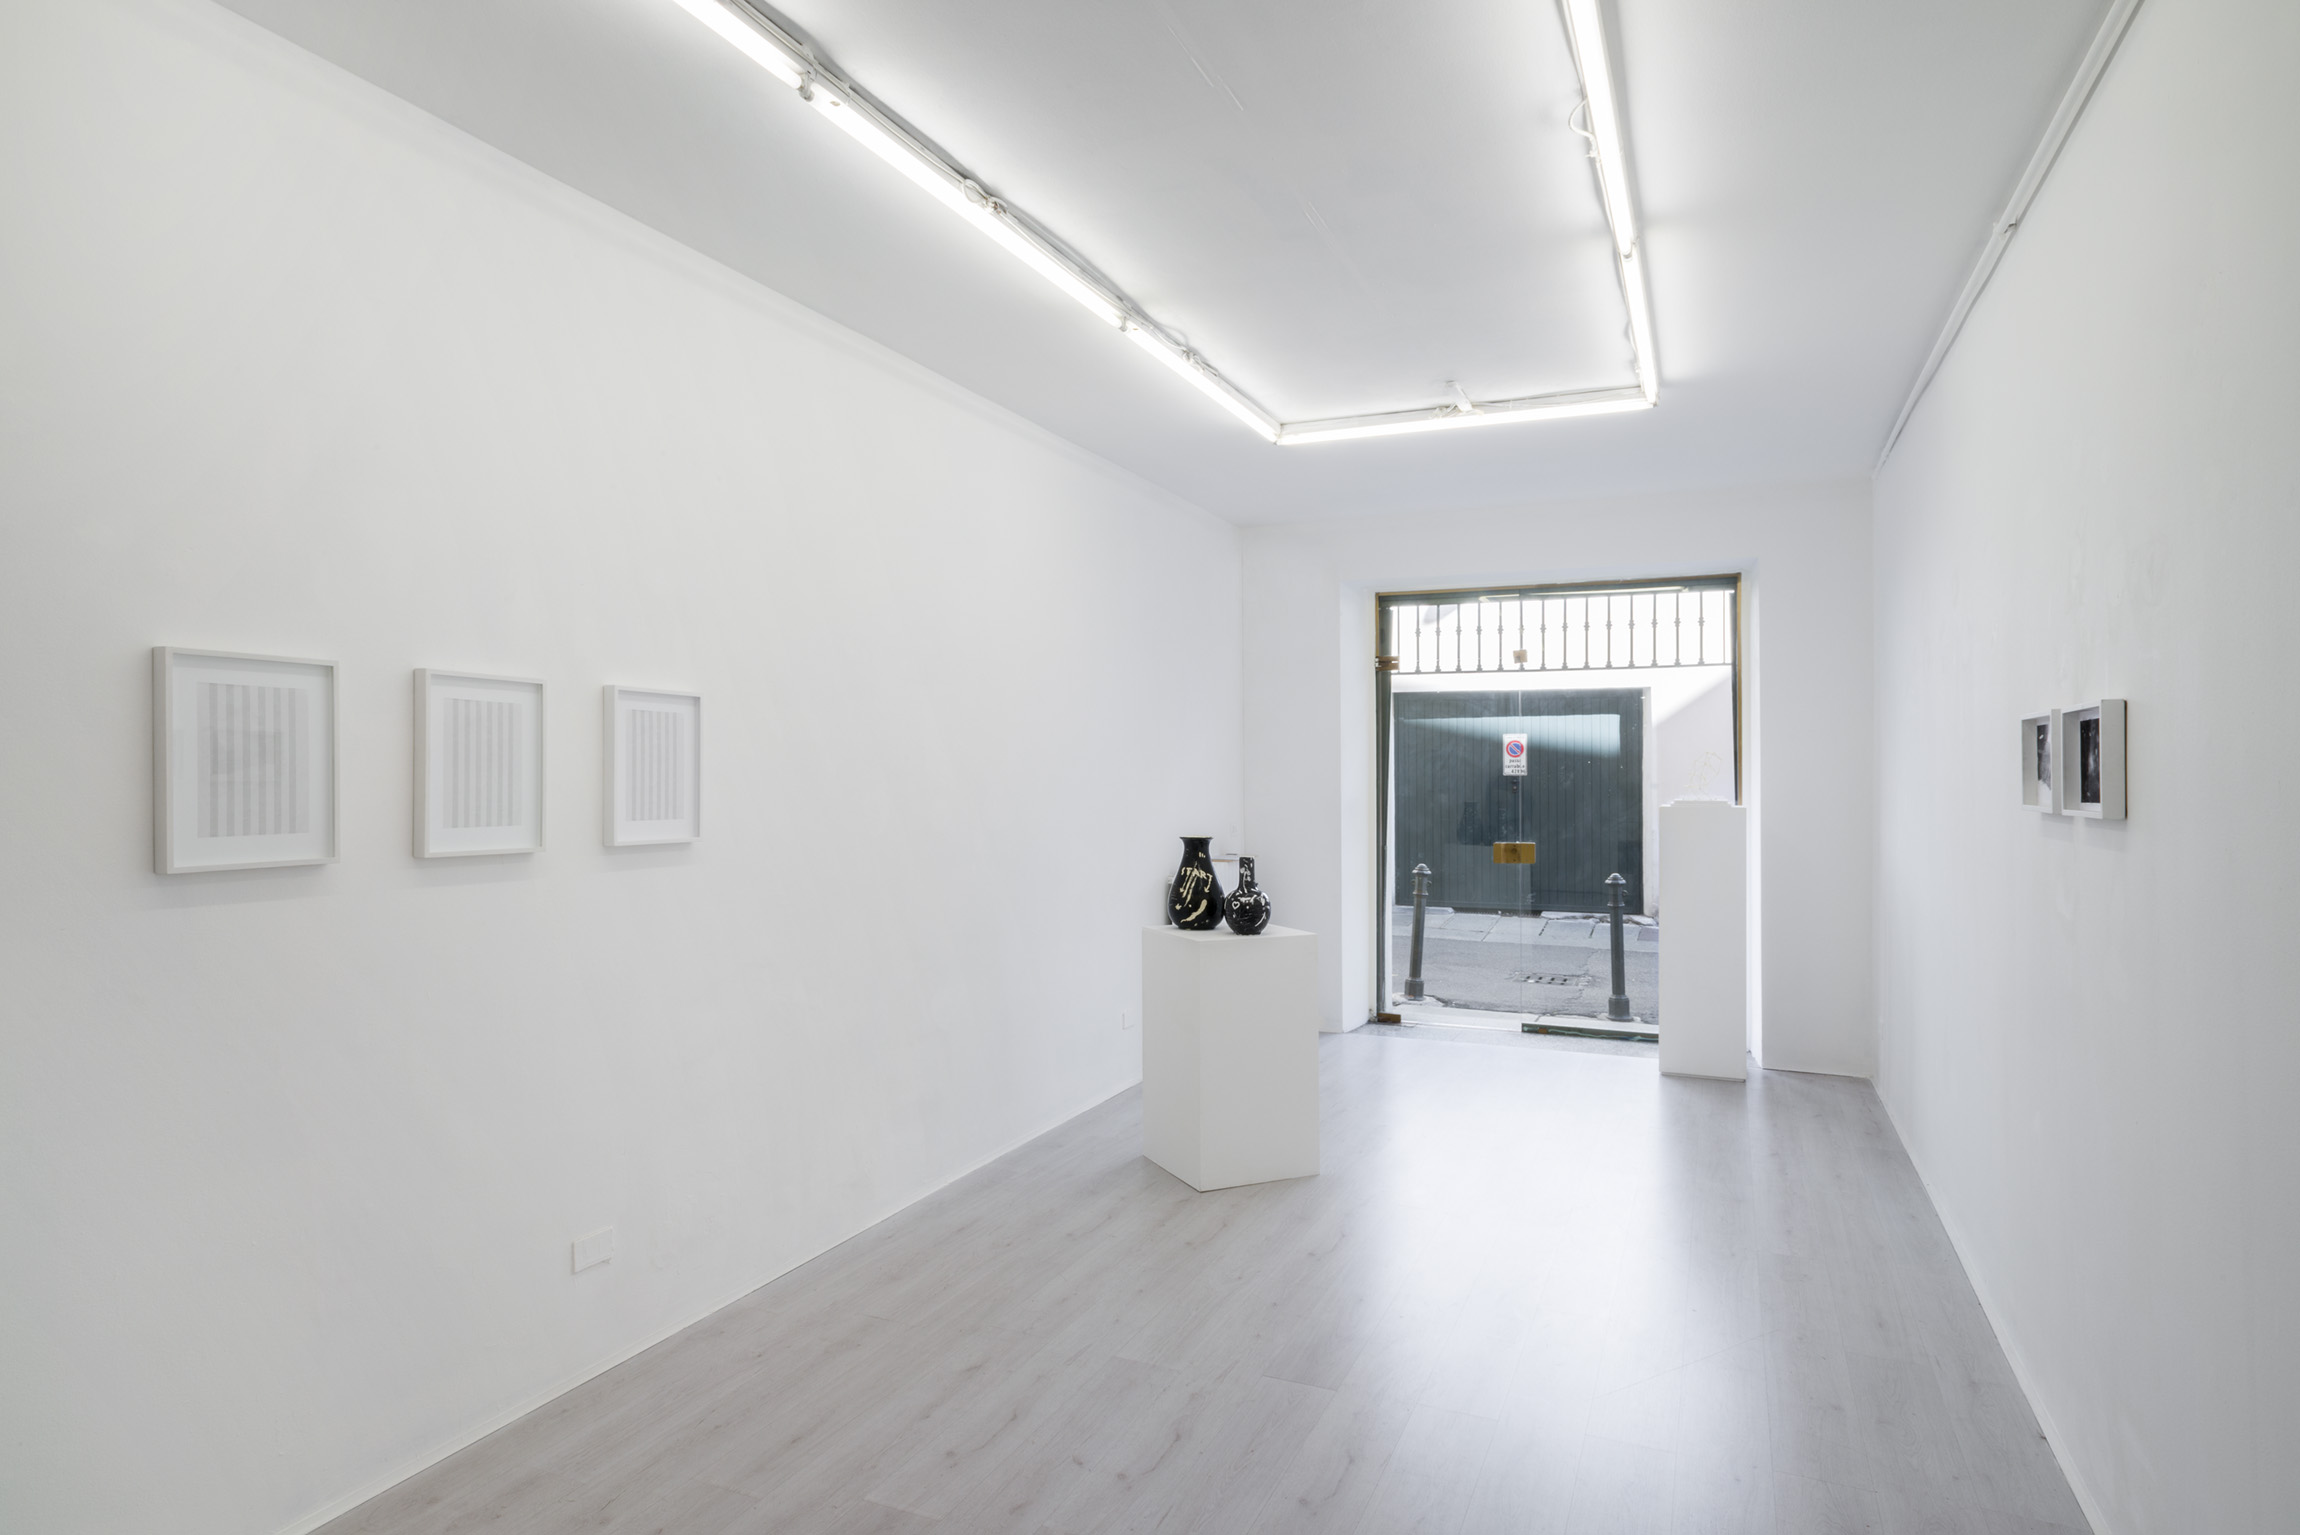 3.-Gianluca-Codeghini-Solo-Noise-exhibition-view-at-AB-gallery-Brescia